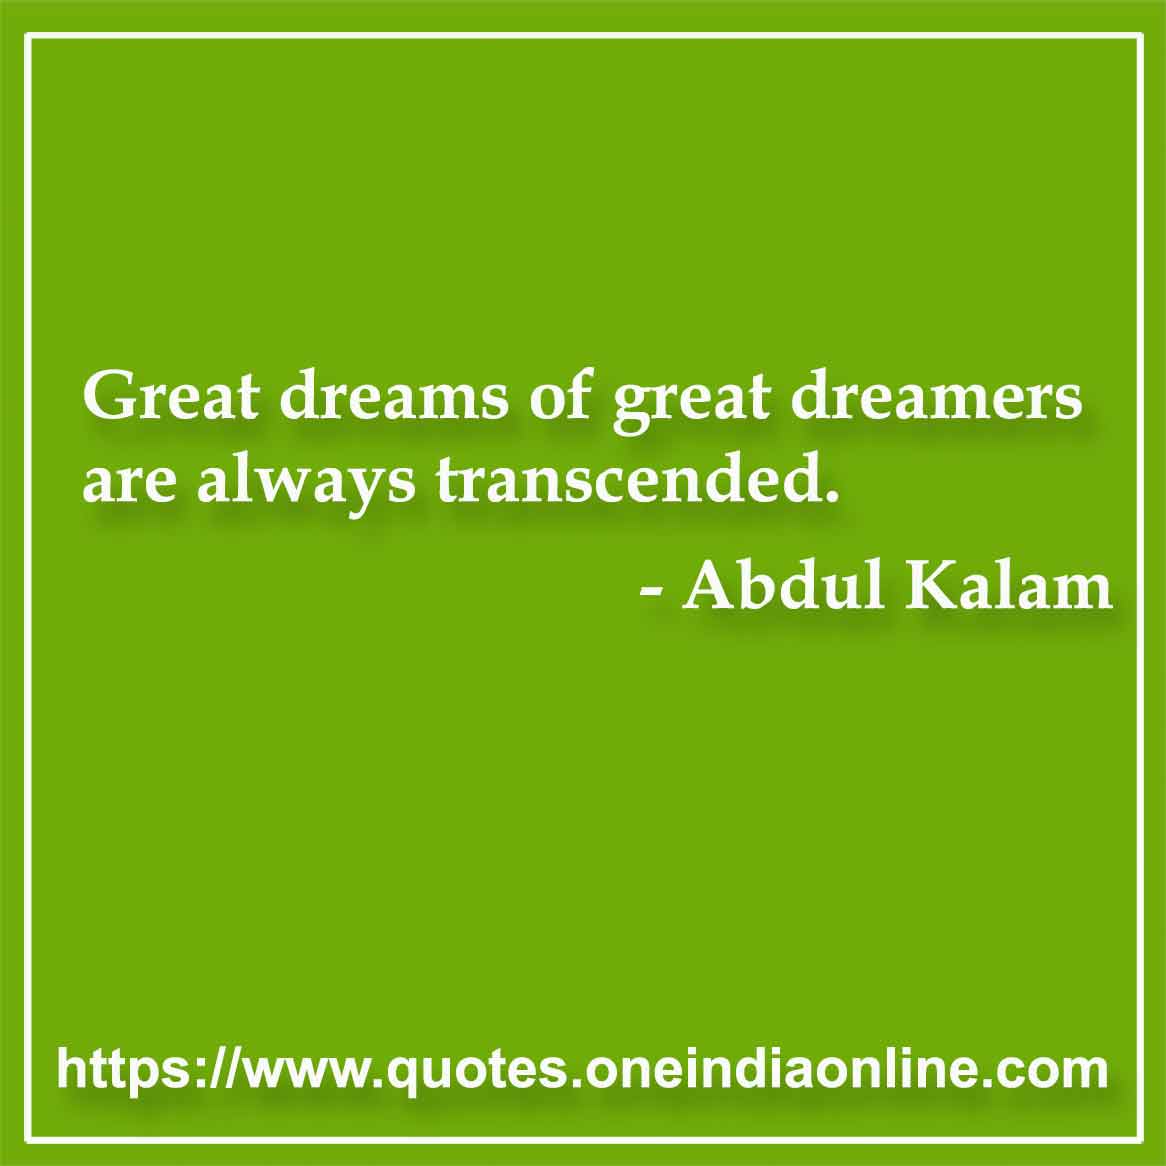 Great dreams of great dreamers are always transcended.
